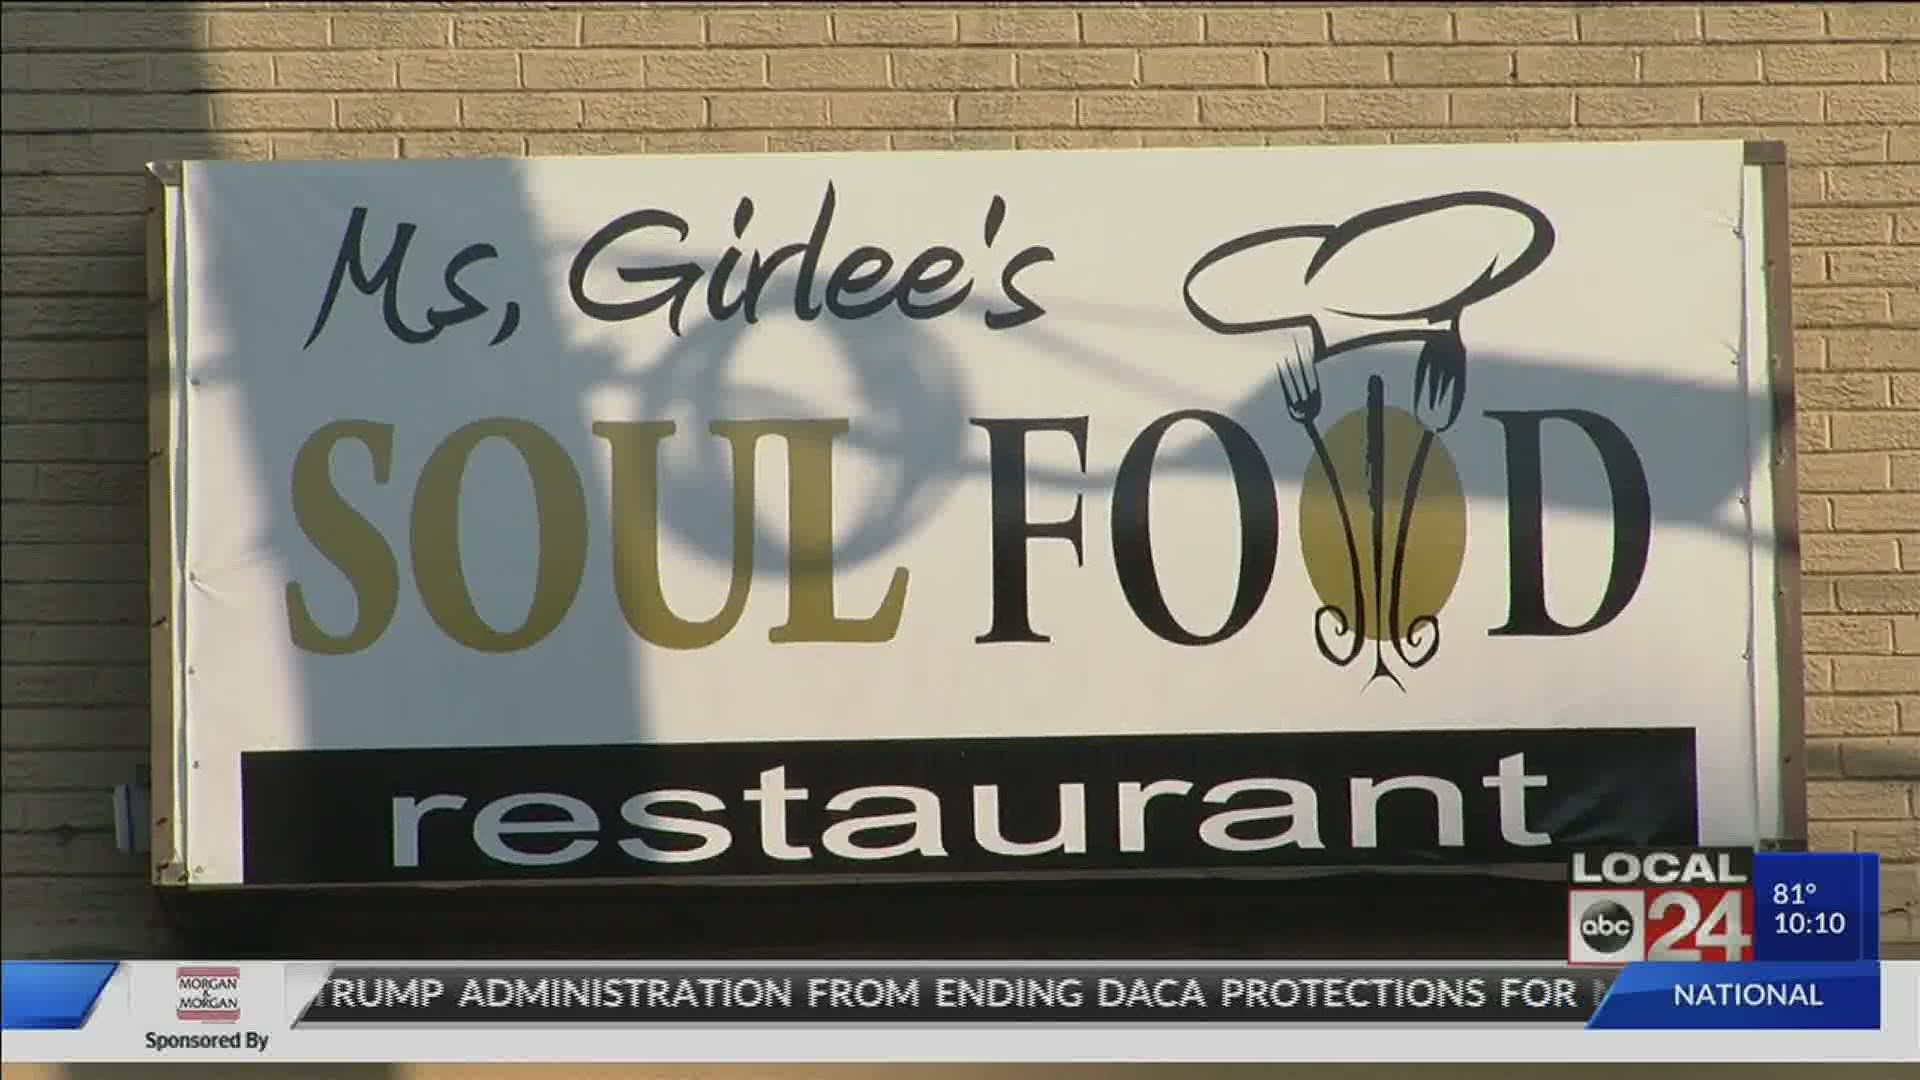 There are more than 70 Black-owned restaurants in the city of Memphis.